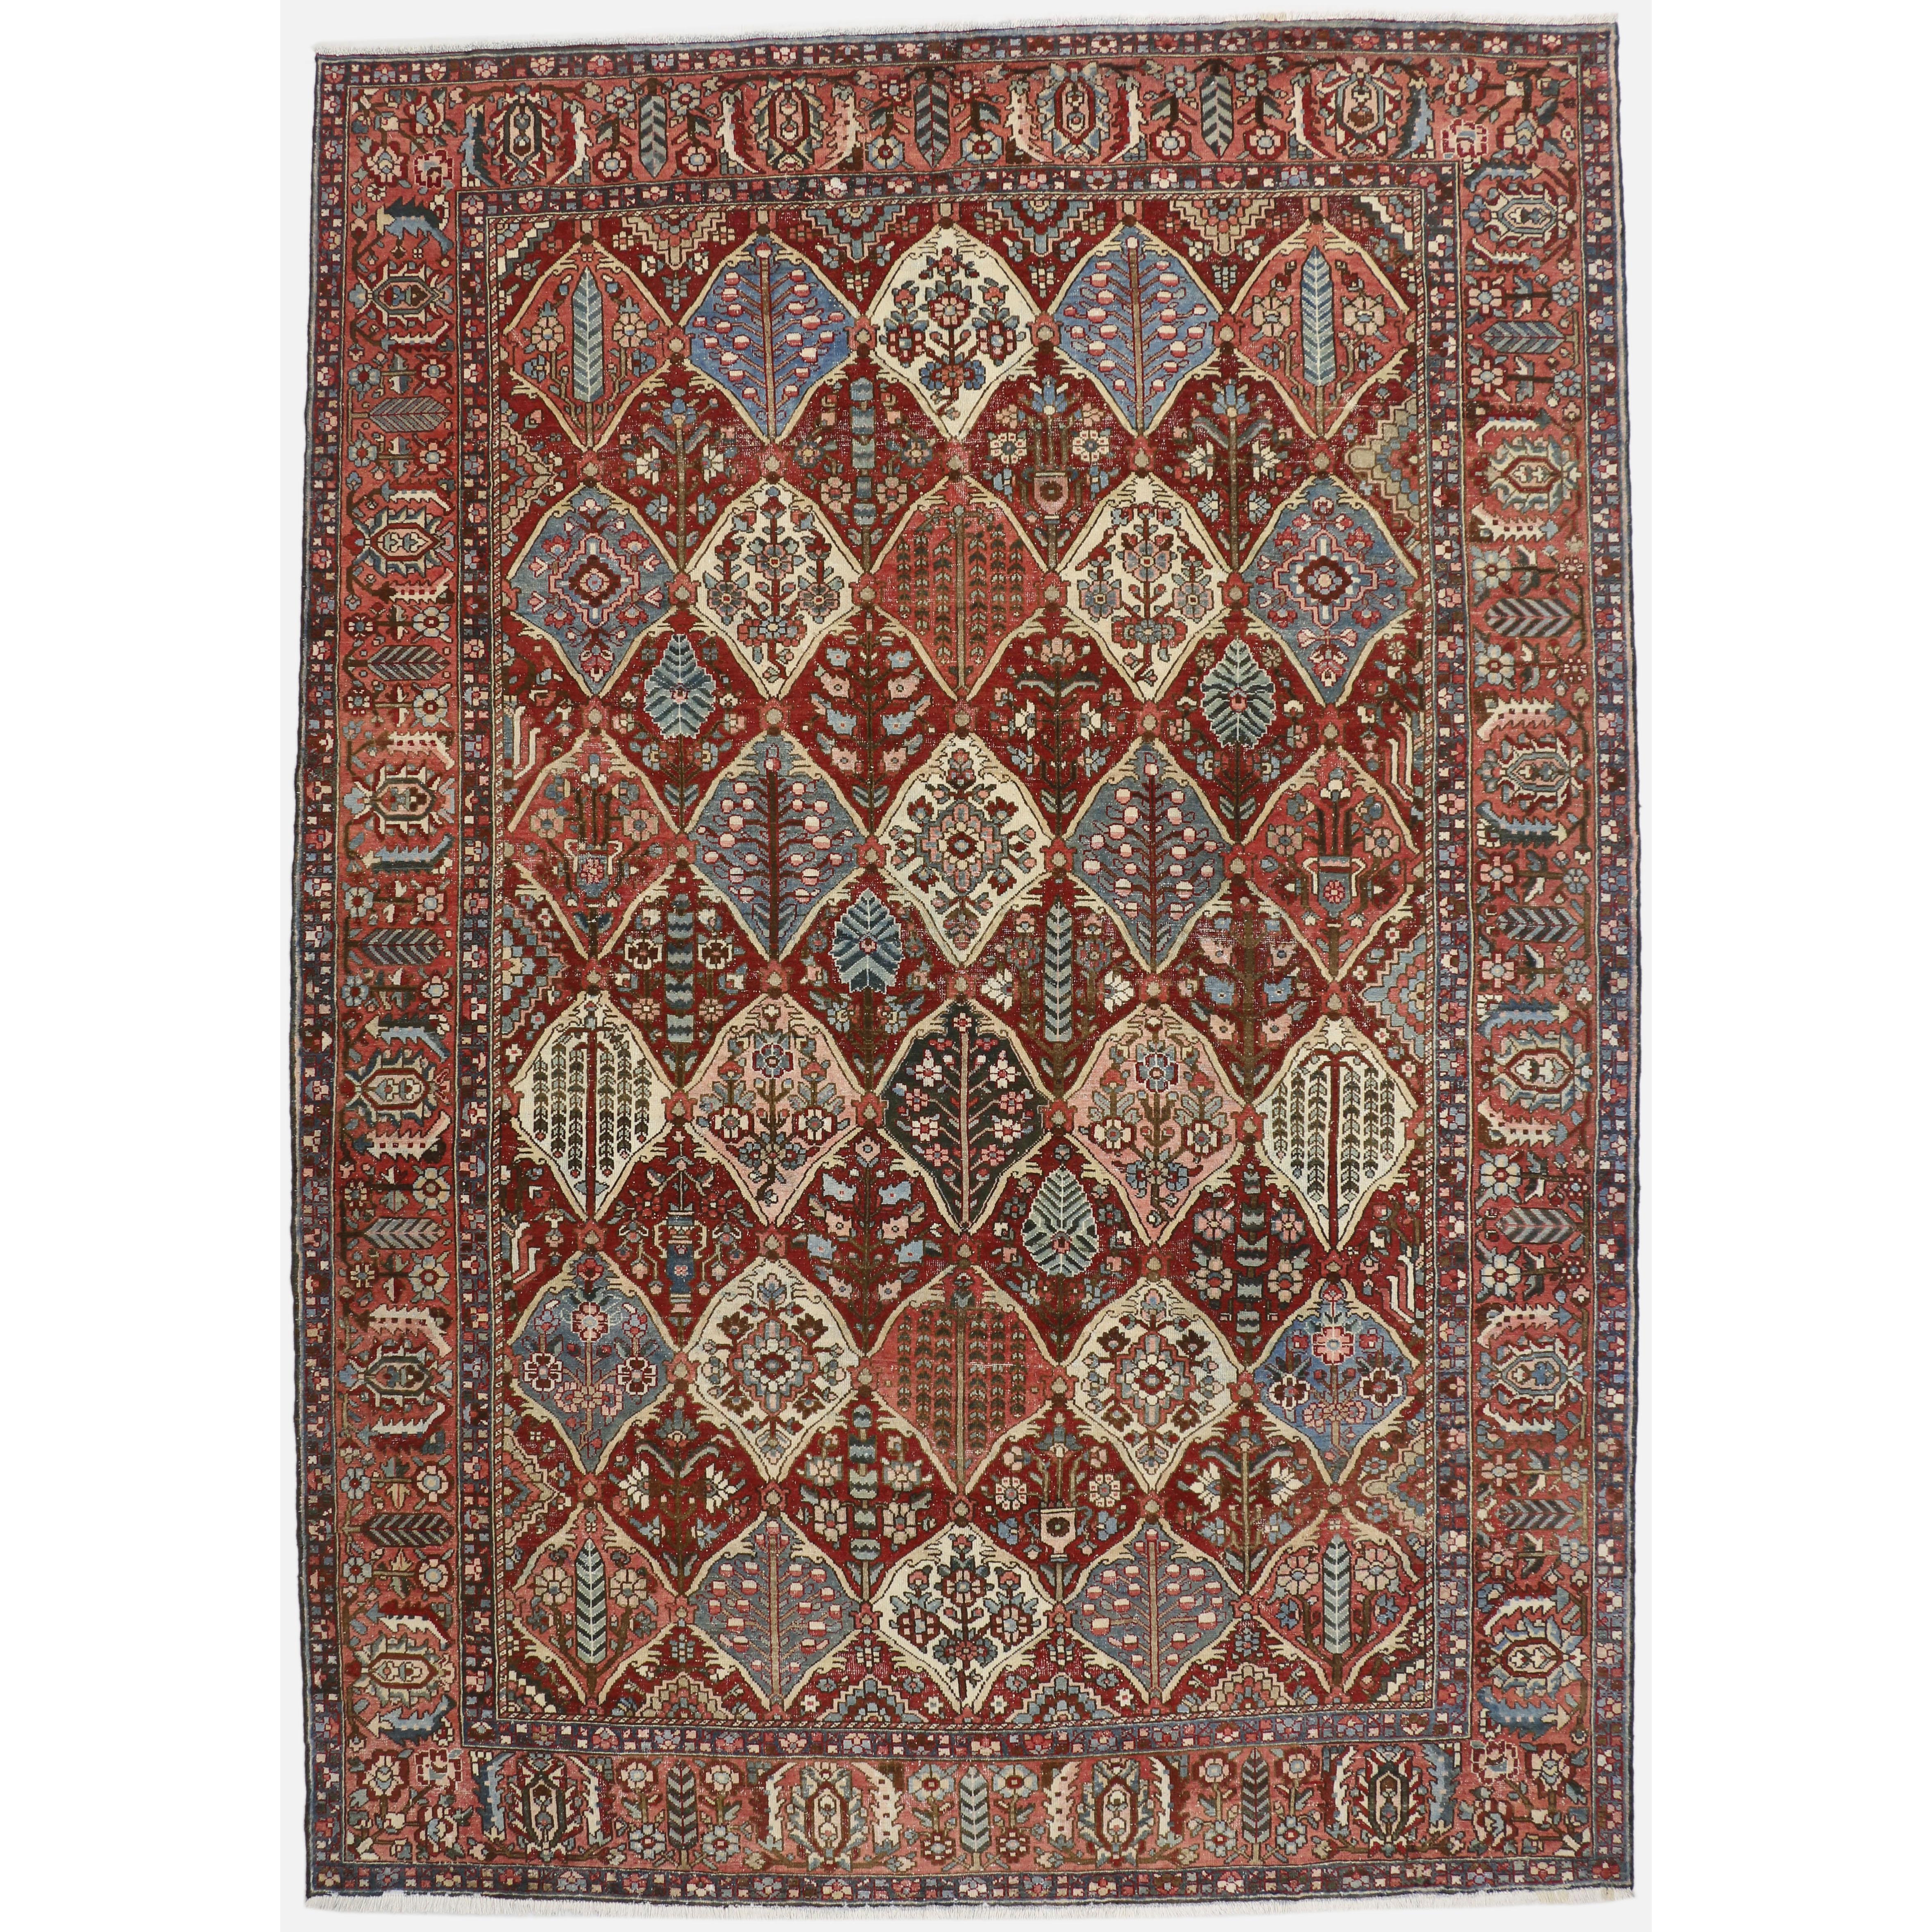 Antique Persian Bakhtiari Rug with Four Seasons Design and Traditional Style